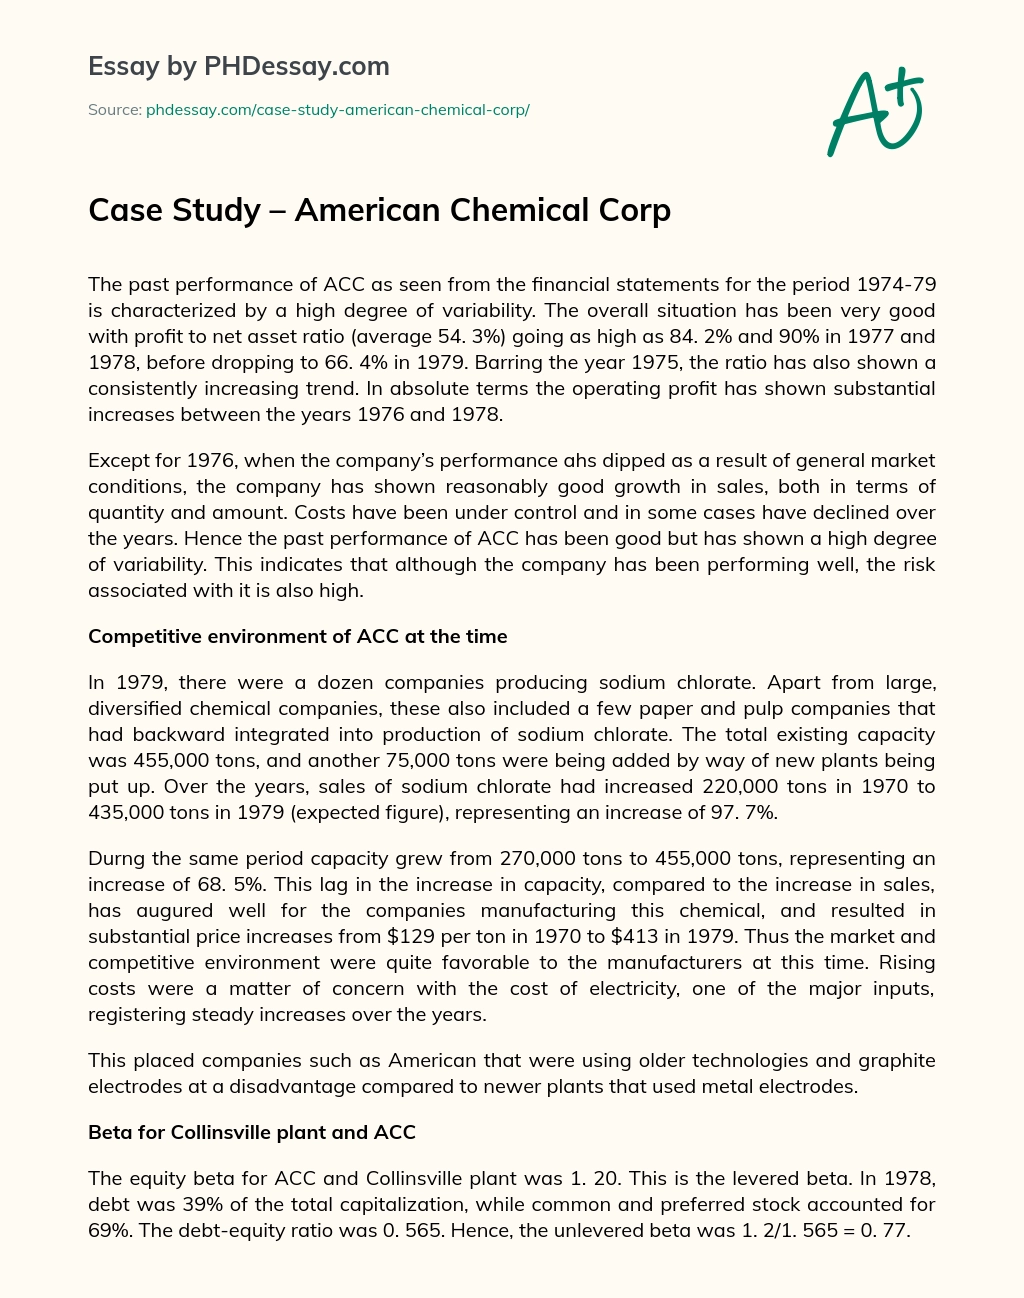 Case Study – American Chemical Corp essay